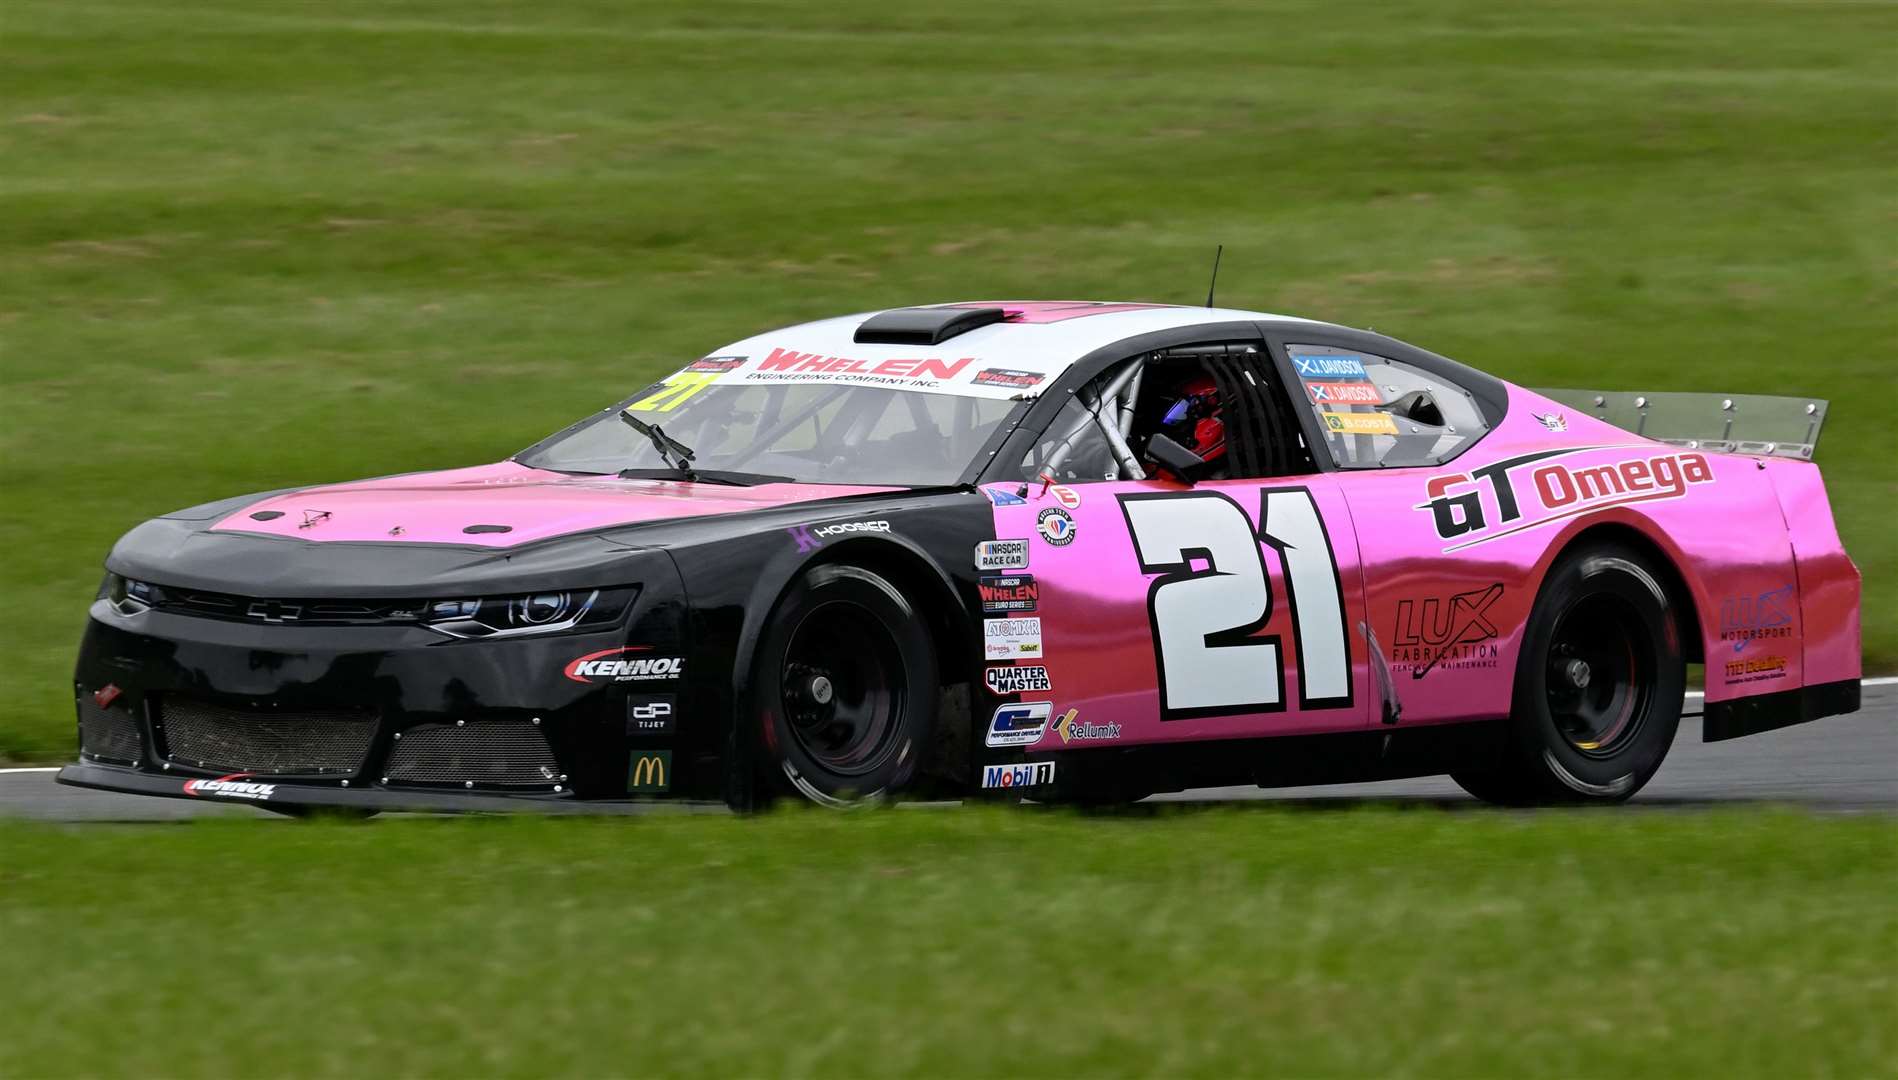 Davidson’s chrome pink livery caught the eye at Brands Hatch, but the team had to use a spare front bumper and wings after a clash in Sunday’s first race. Picture: Simon Hildrew